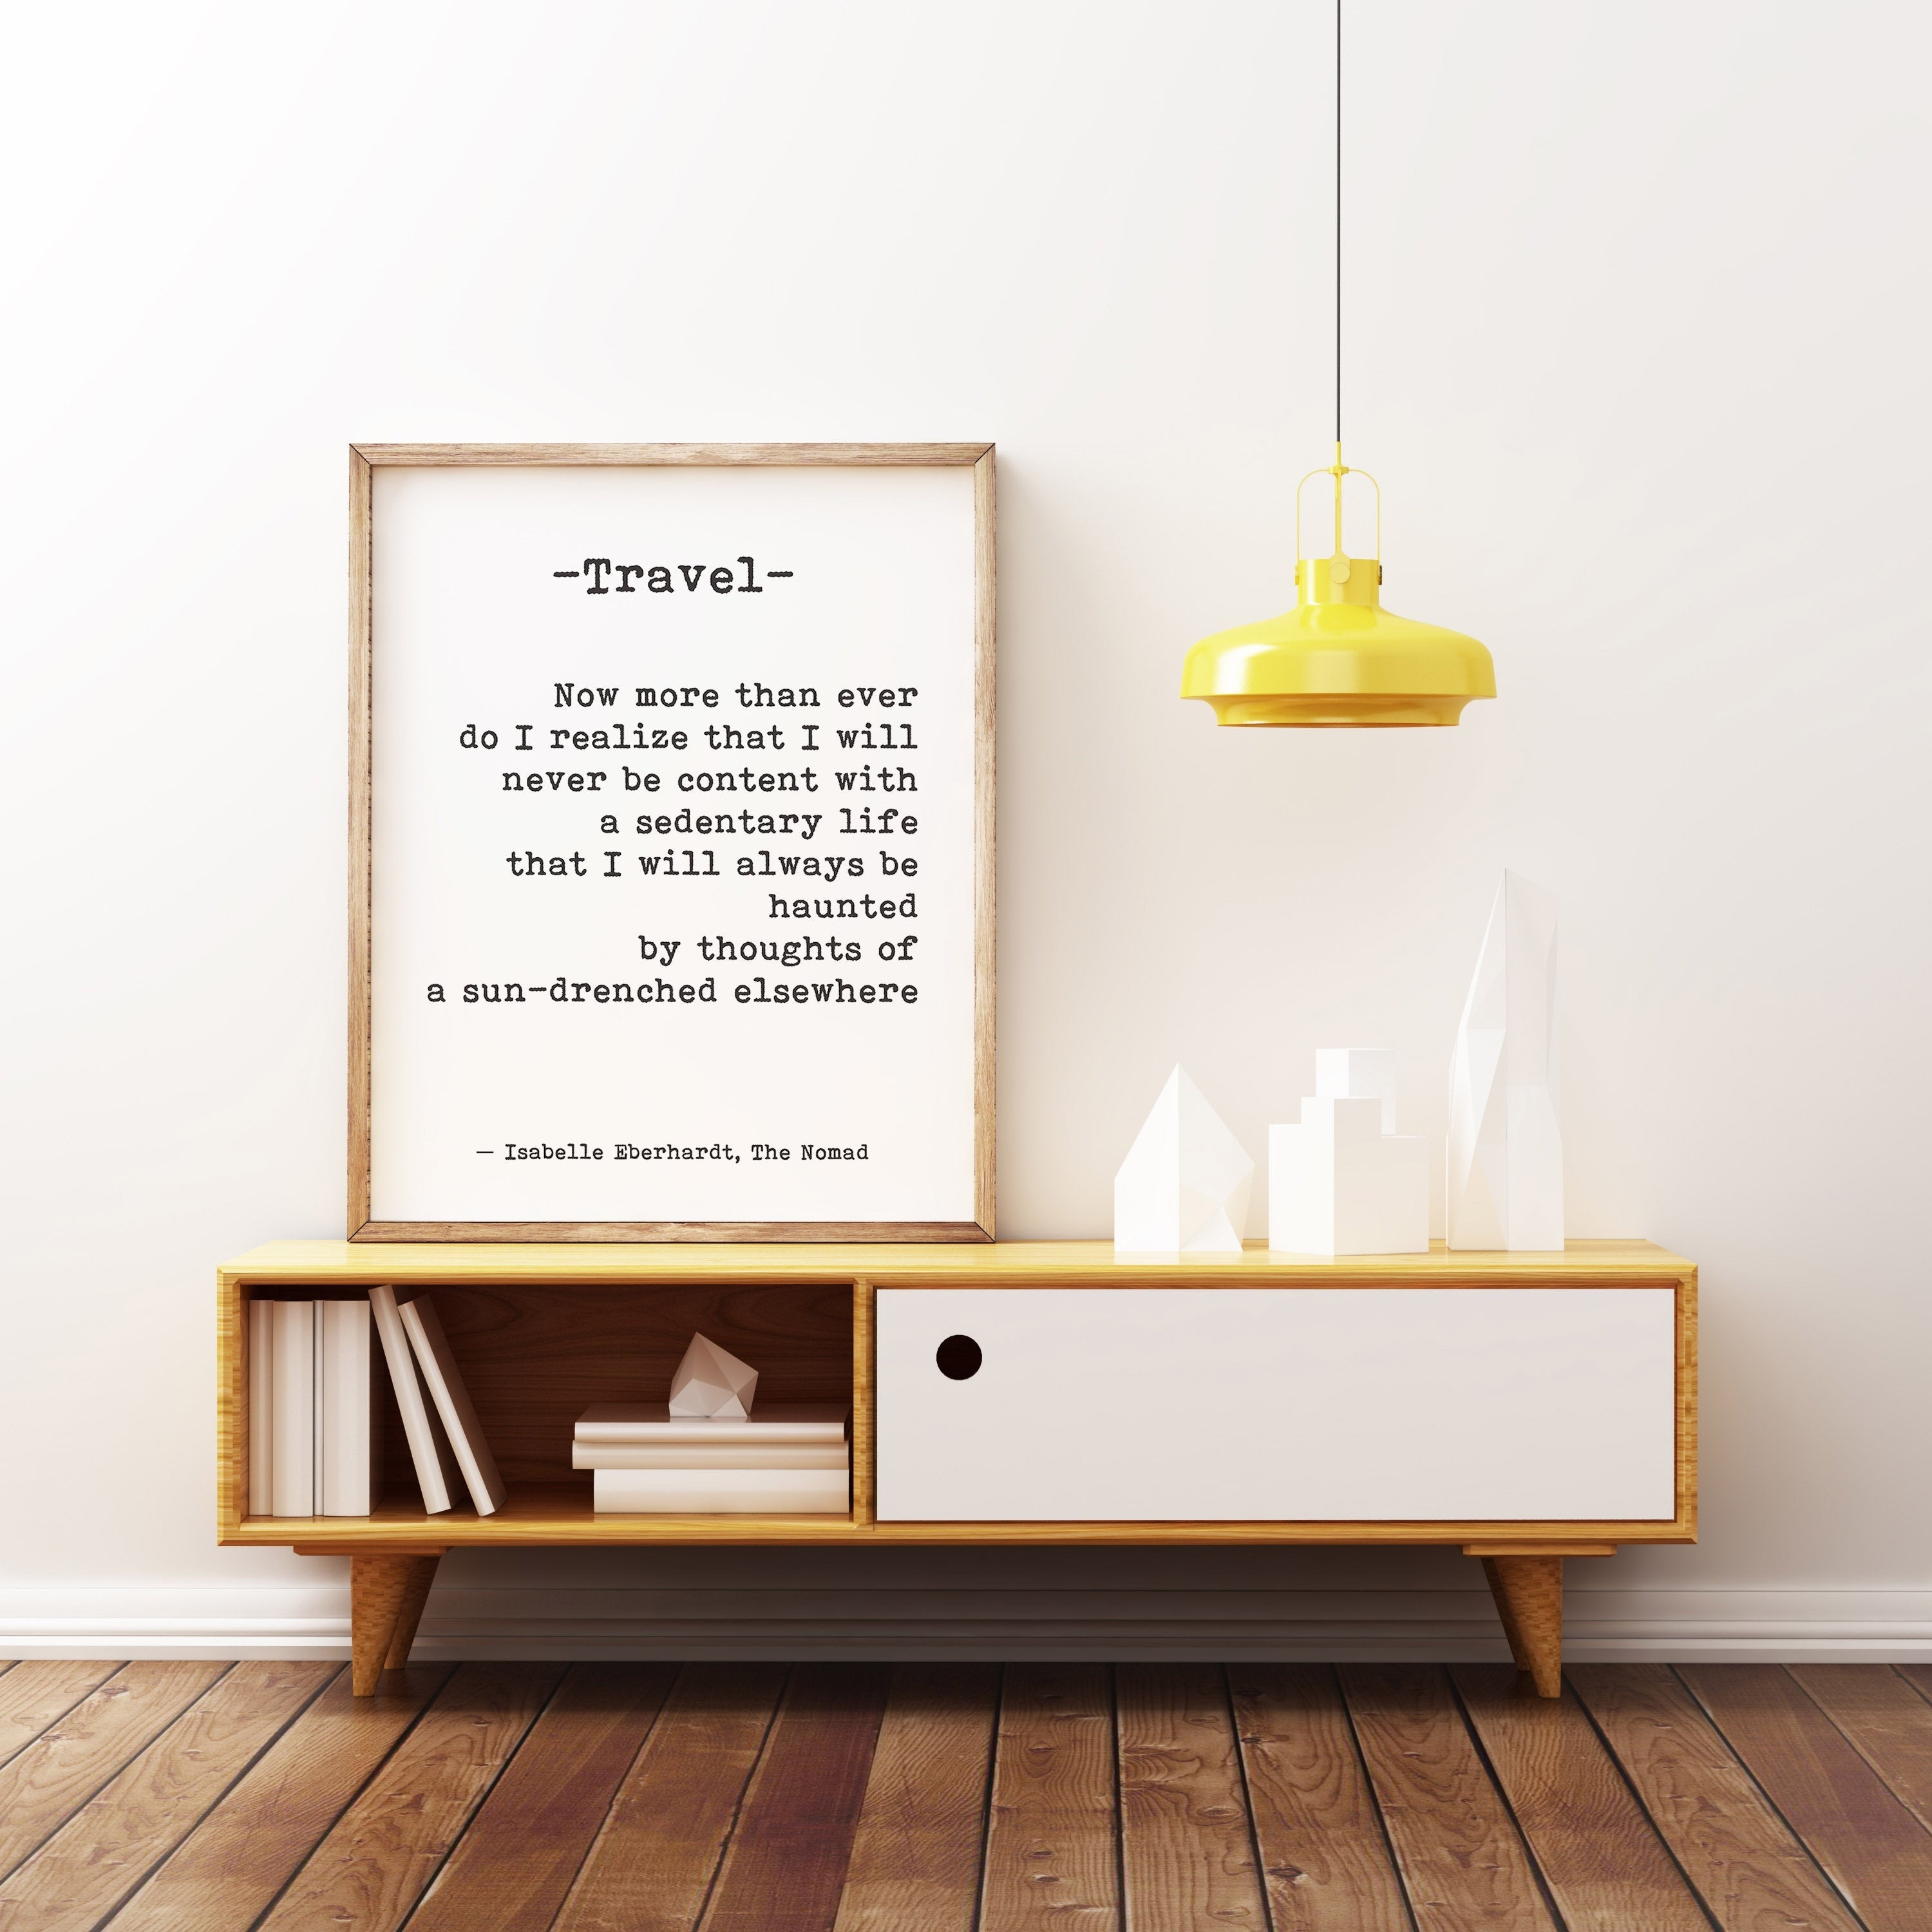 The Nomad Isabelle Eberhardt Quote Wall Art Prints, Unframed Black & White Travel Wall Decor